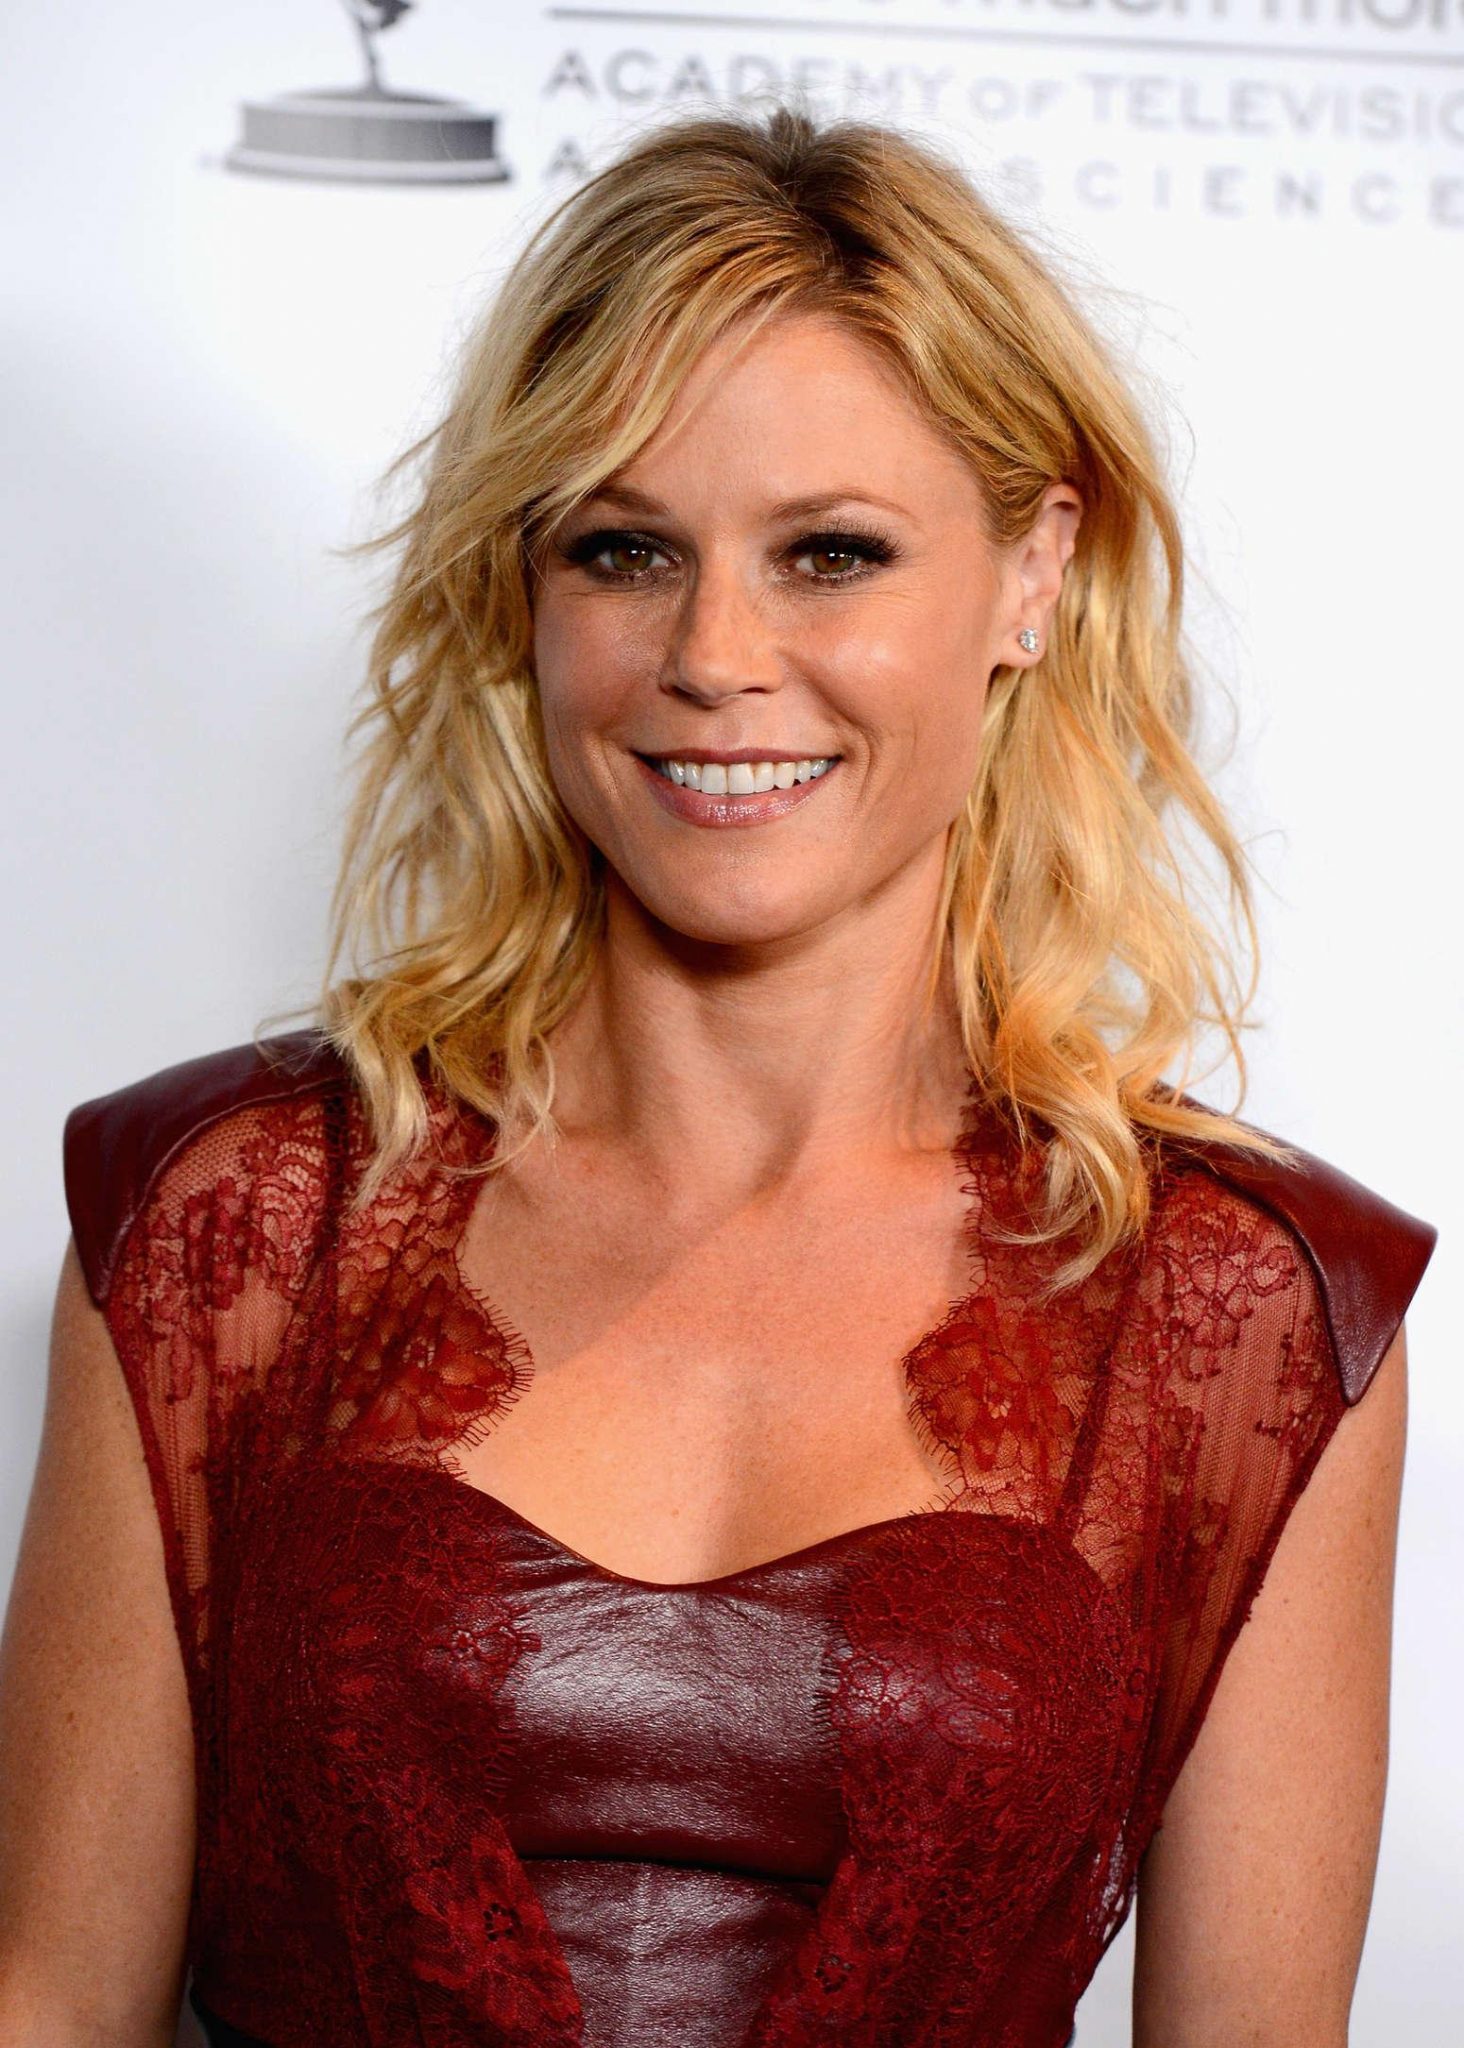 49 Julie Bowen Nude Pictures Are Sure To Keep You At The Edge Of Your Seat 550